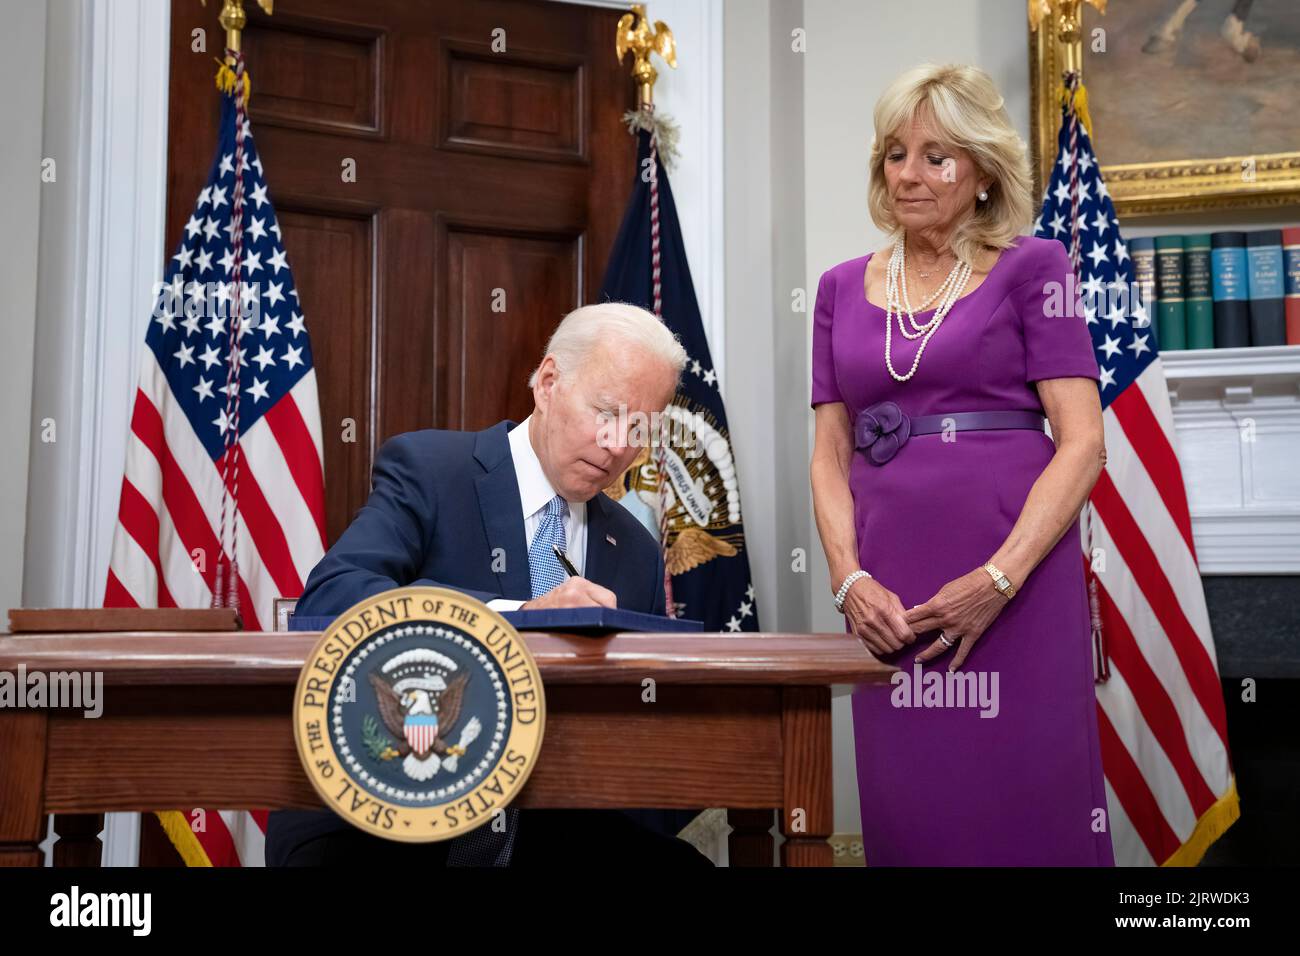 President Joe Biden, joined by First Lady Jill Biden, signs gun safety bill S. 2938, the Bipartisan Safer Communities Act, Saturday, June 25, 2022, in the Roosevelt Room of the White House. (Official White House Photo by Erin Scott) Stock Photo